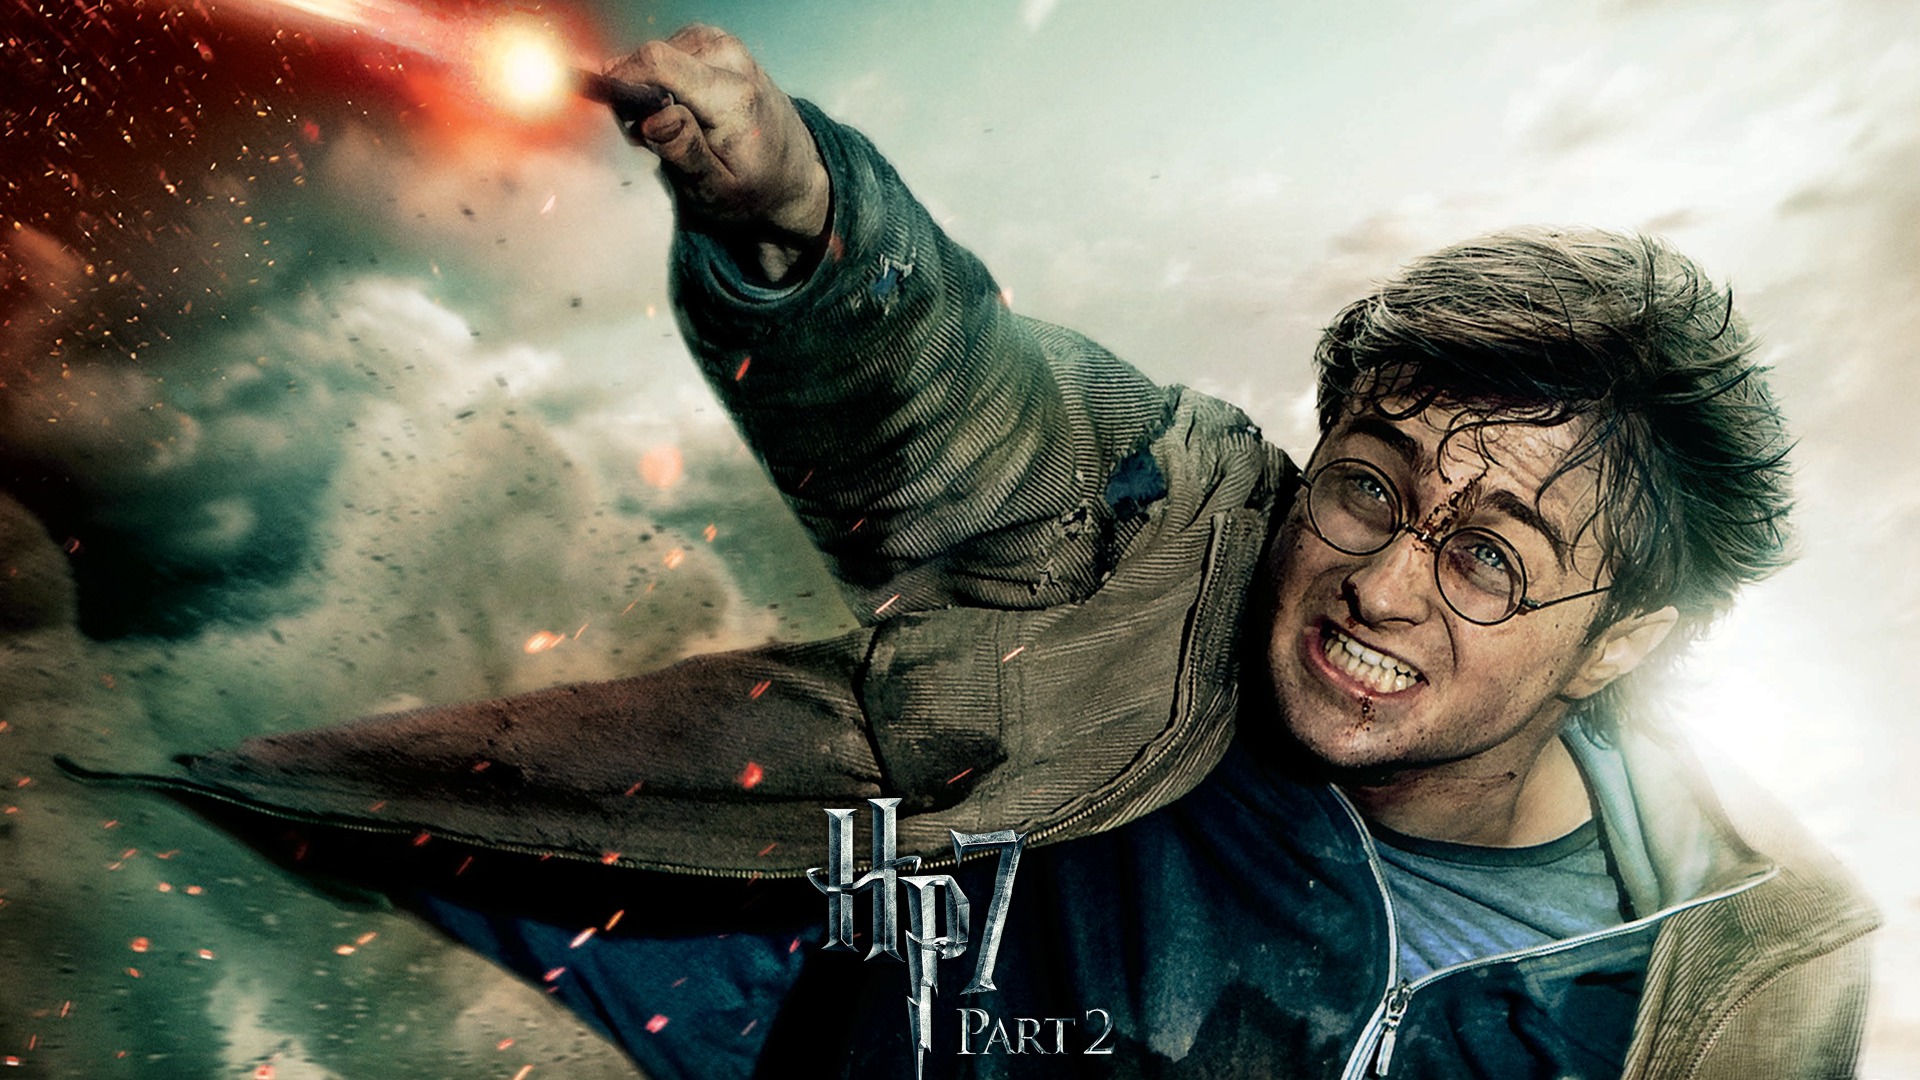 2011 Harry Potter and the Deathly Hallows HD wallpapers #22 - 1920x1080